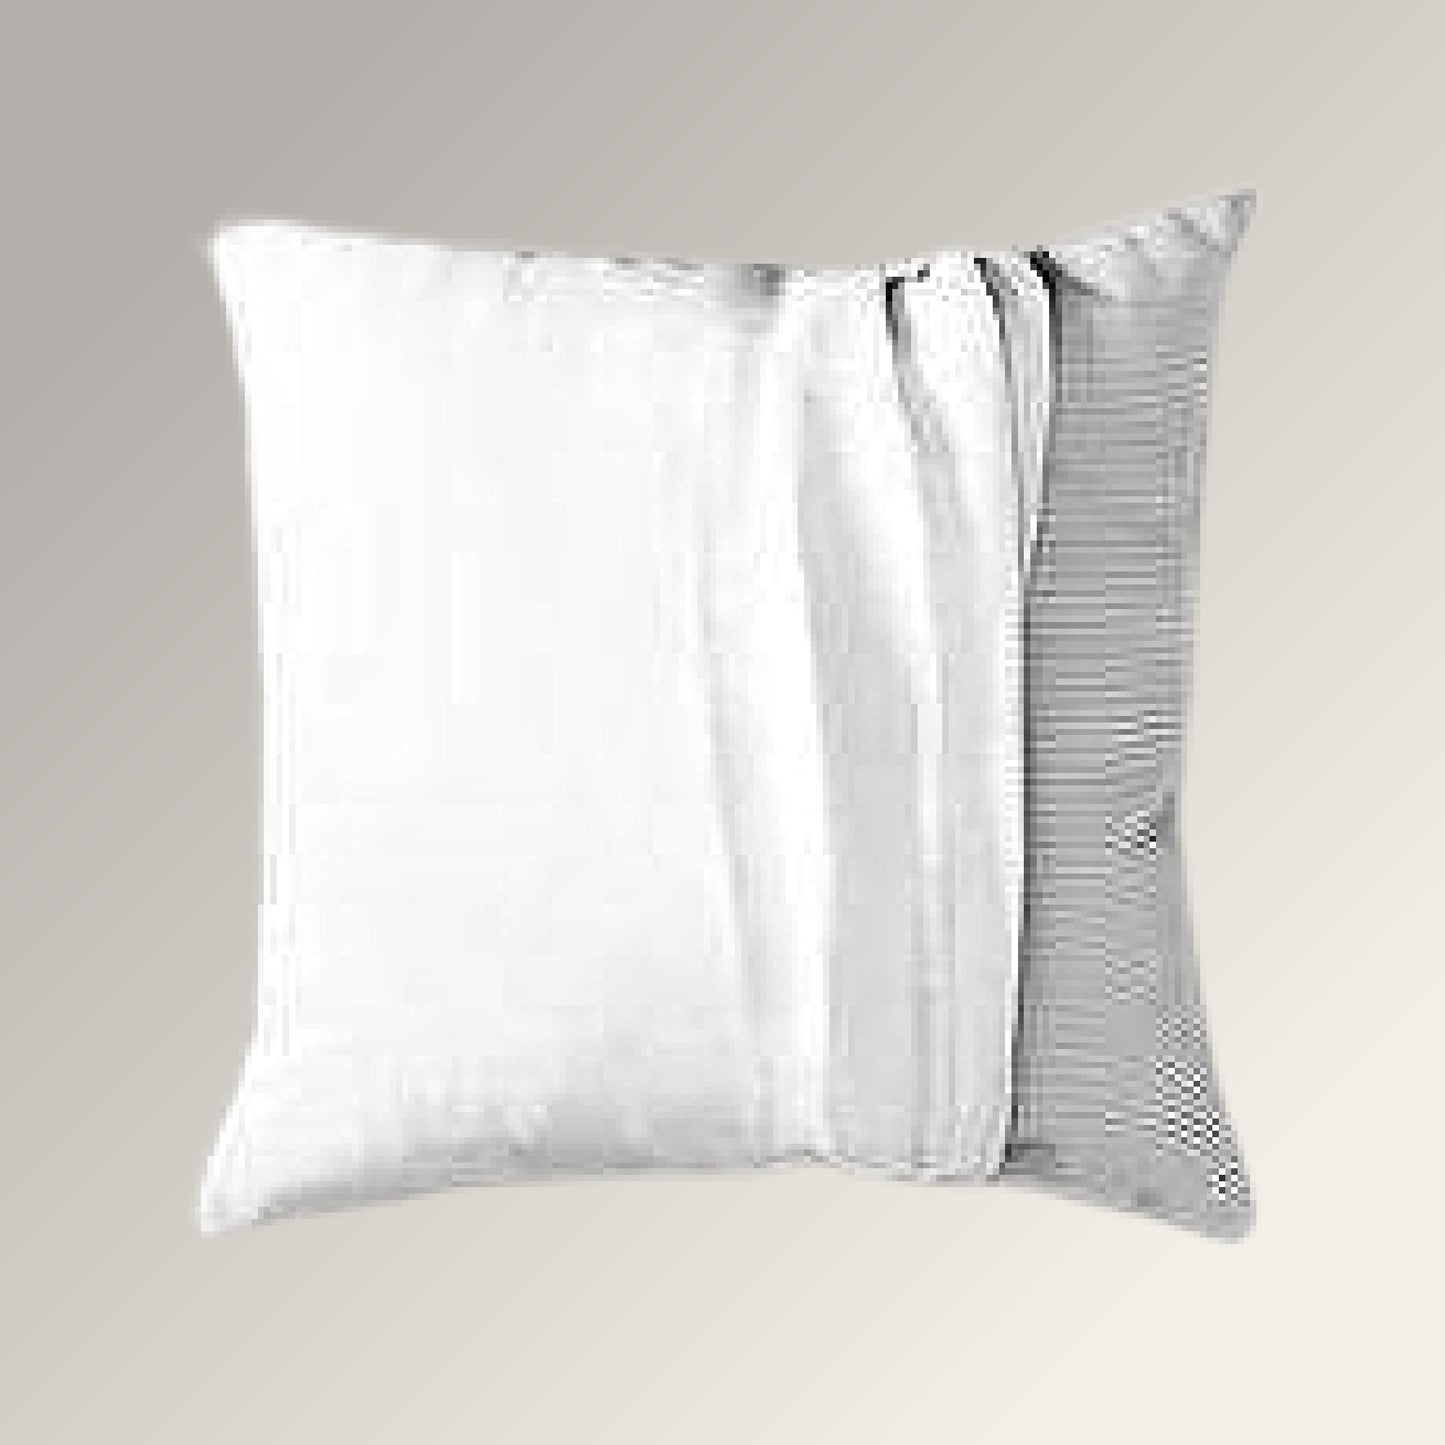 Diagram of how to pull a pillow case over an existing square pillow